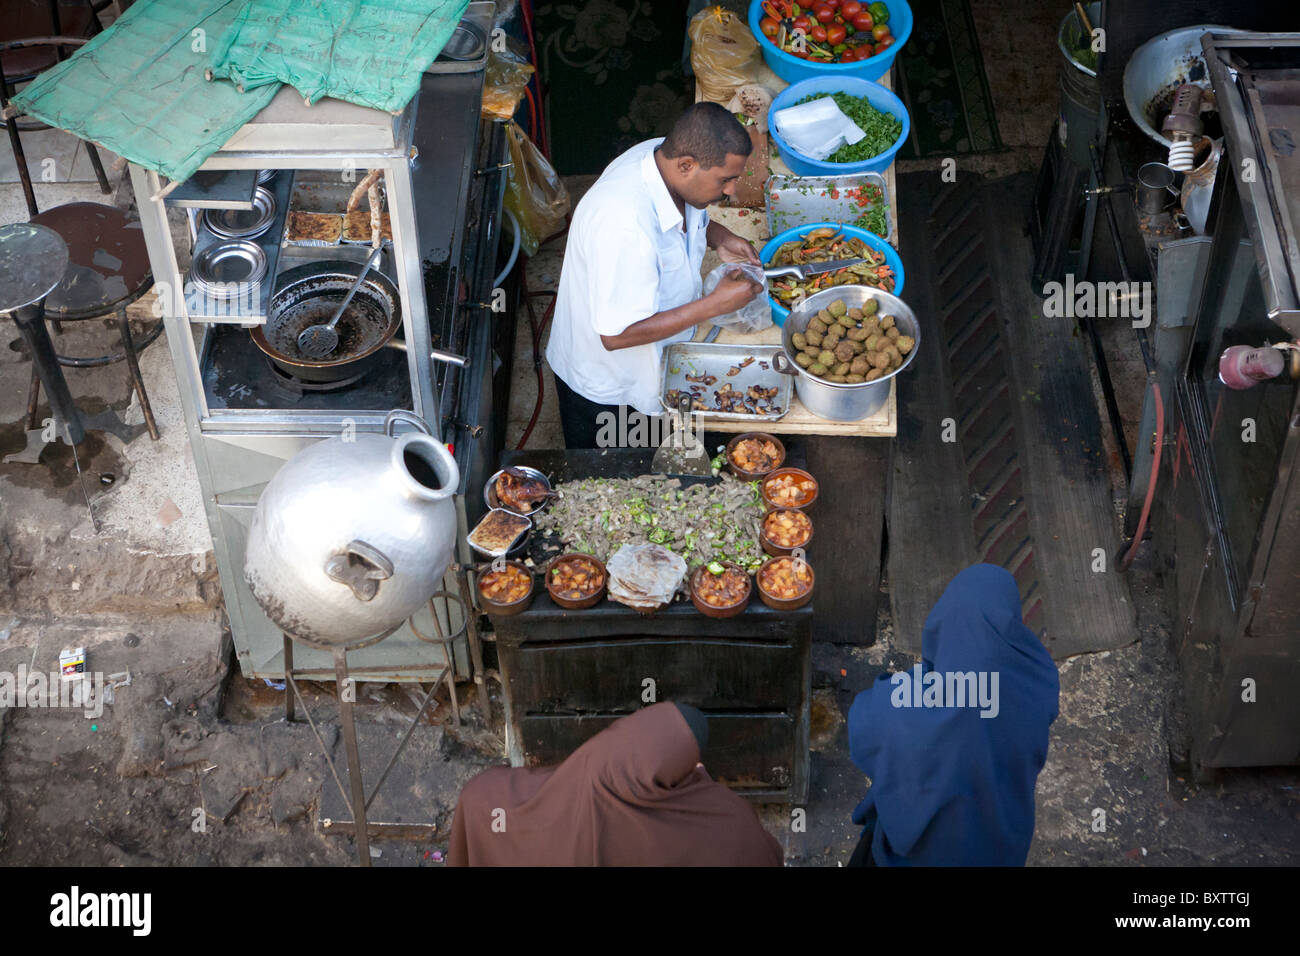 Local street market trader preparing food to serve two women at a street cafe in Luxor, Egypt, Africa Stock Photo